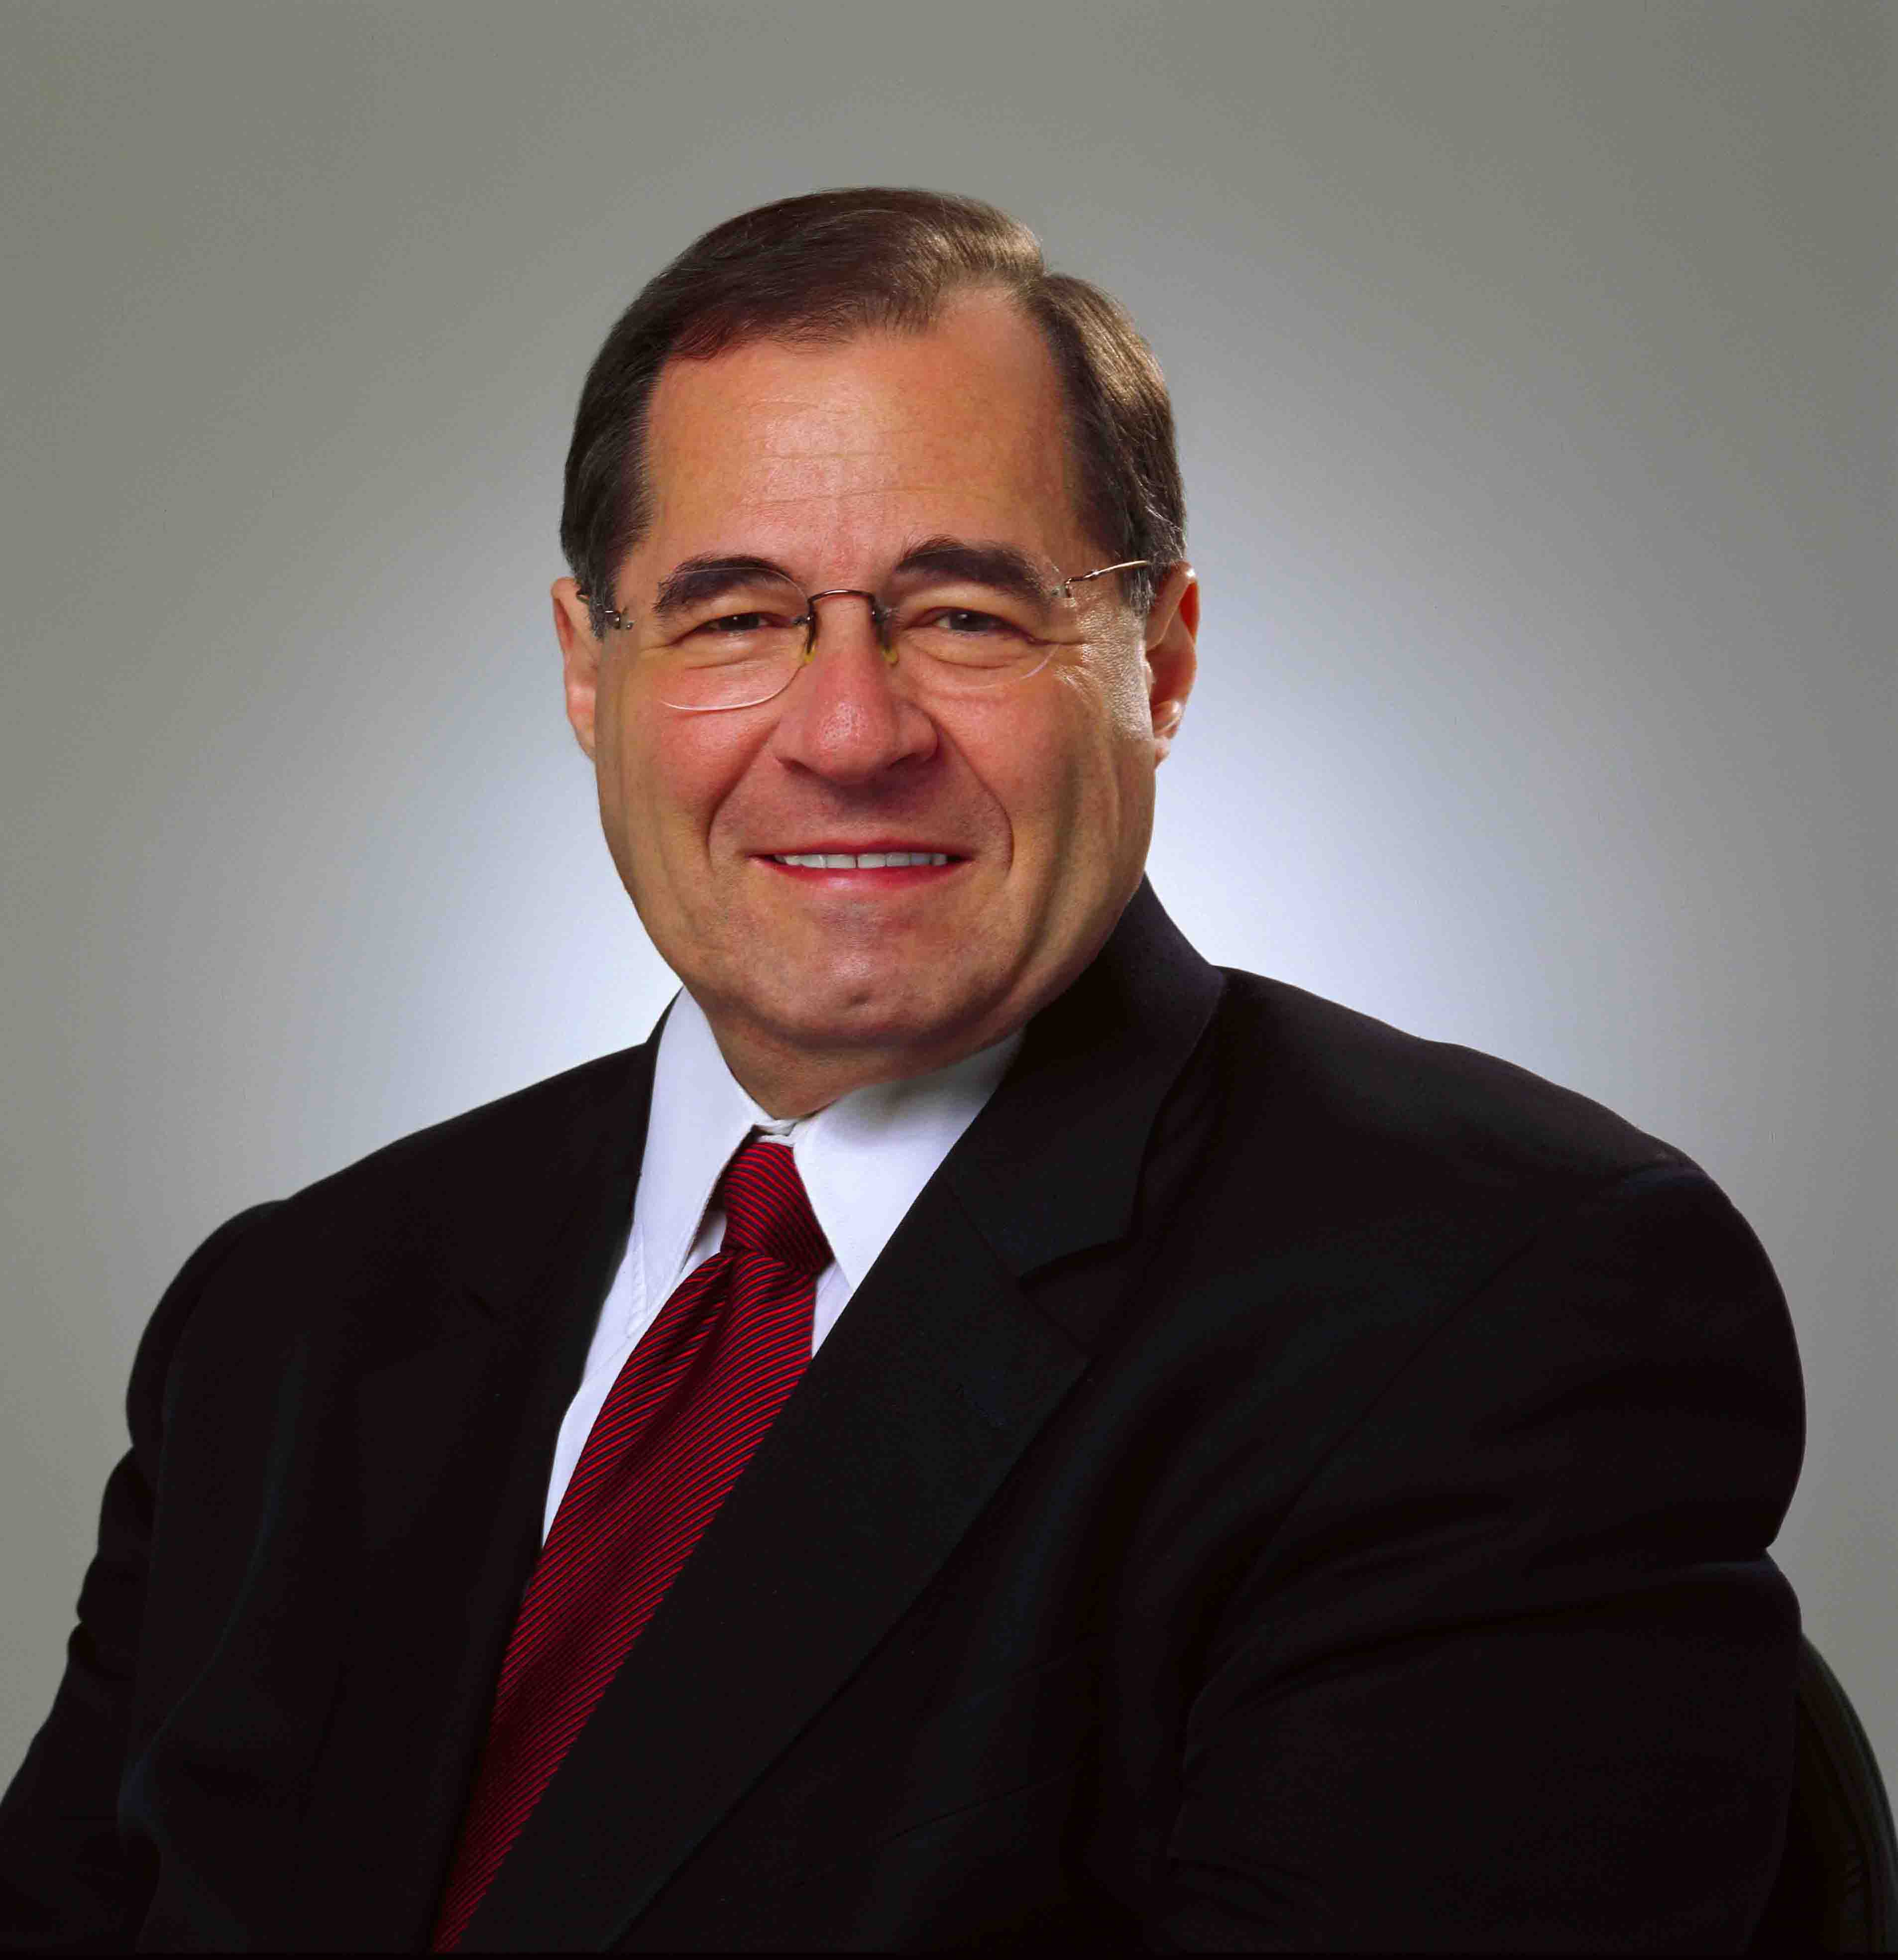 Rep. Nadler:  You and I are going to legalize marijuana